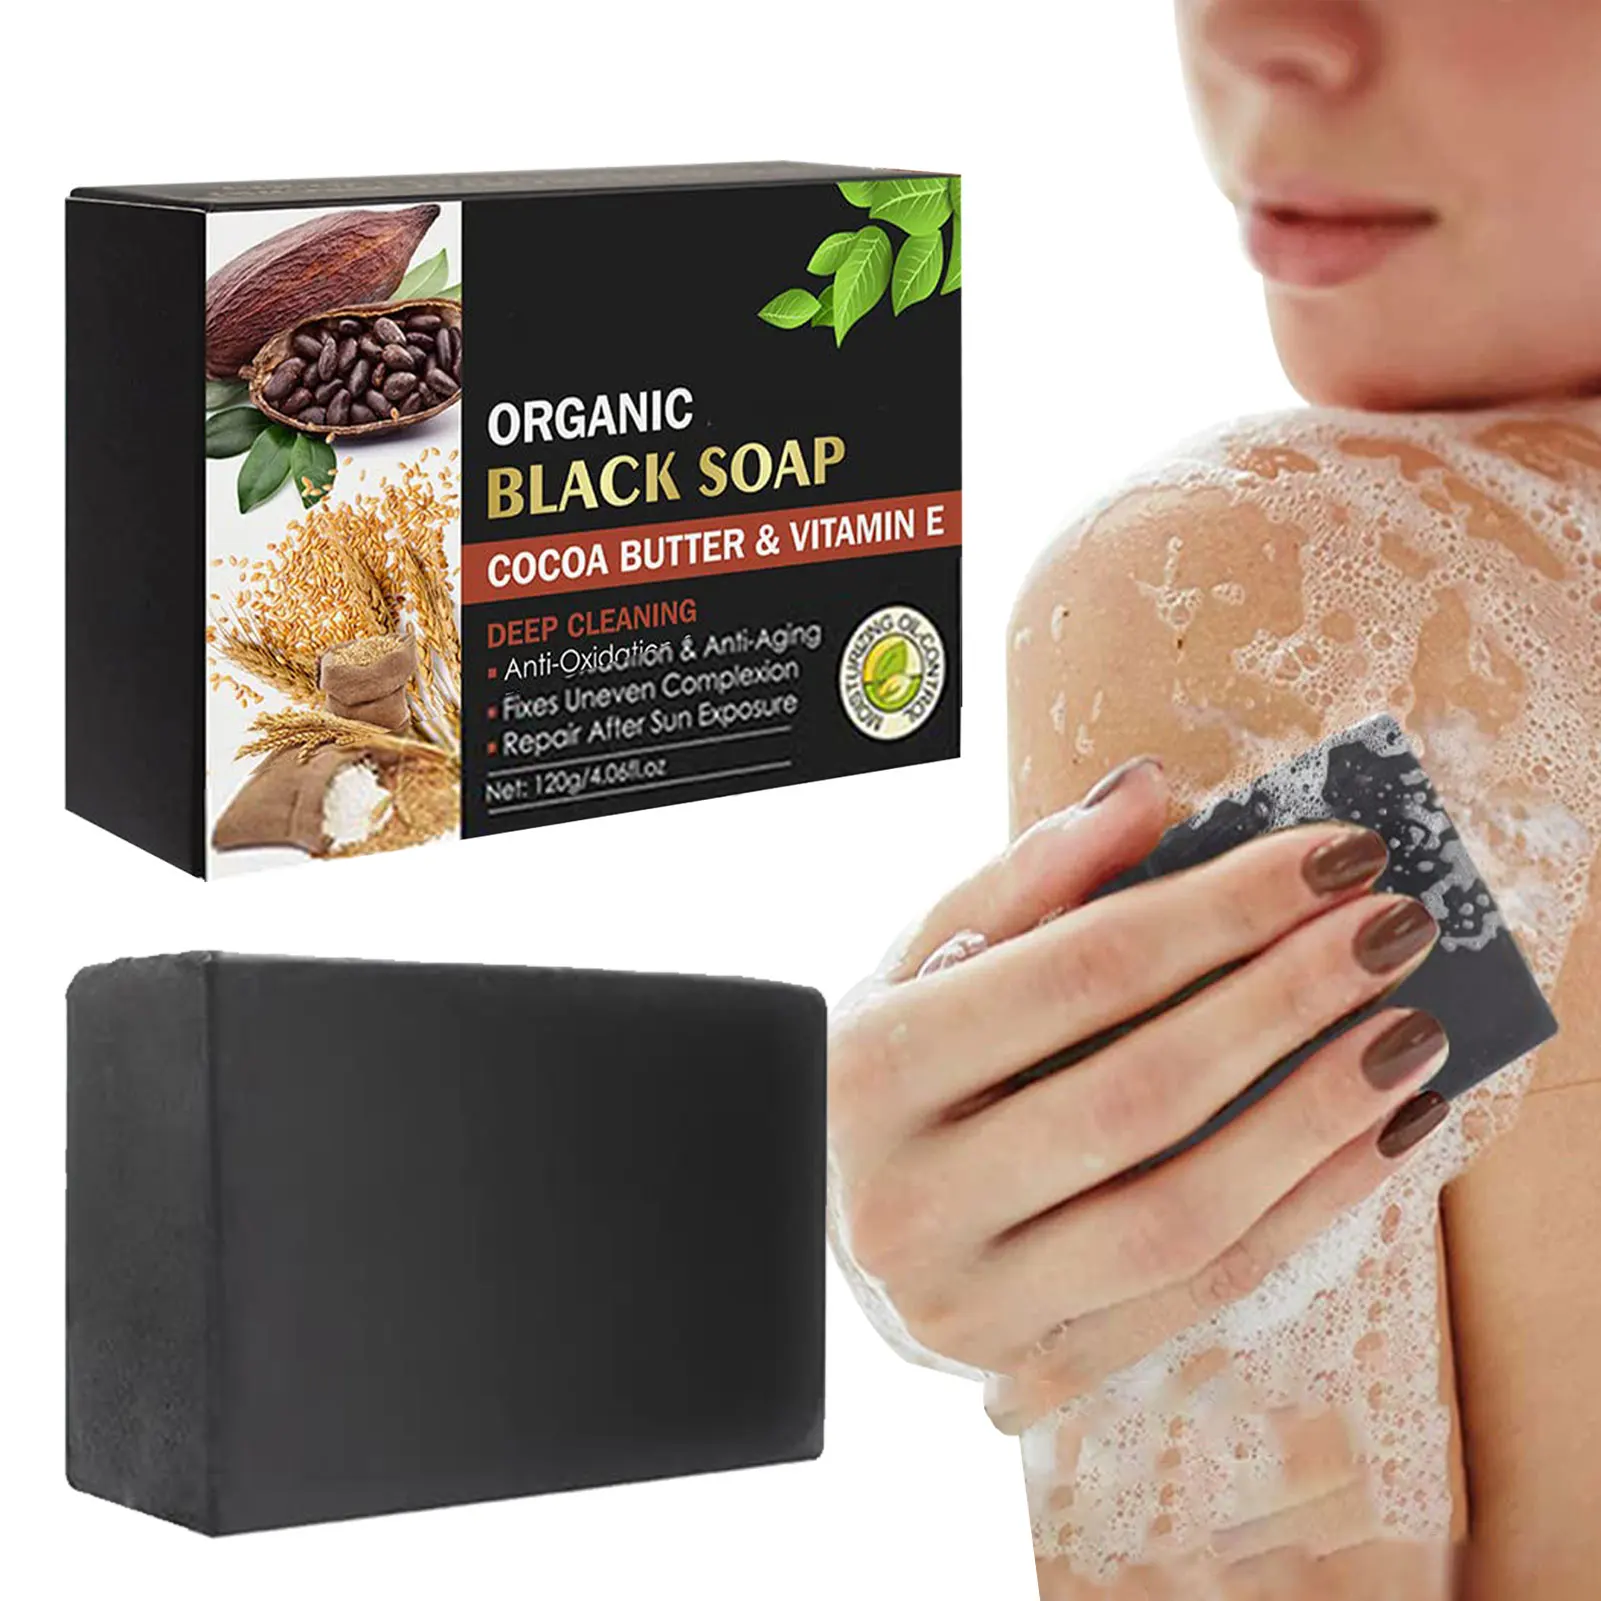 

Soap Bar Black Black Soap Cocoa Butter With Vitamin E Bubbly Rich Body Wash And Face Wash For All Skin Types Cleansing Dark